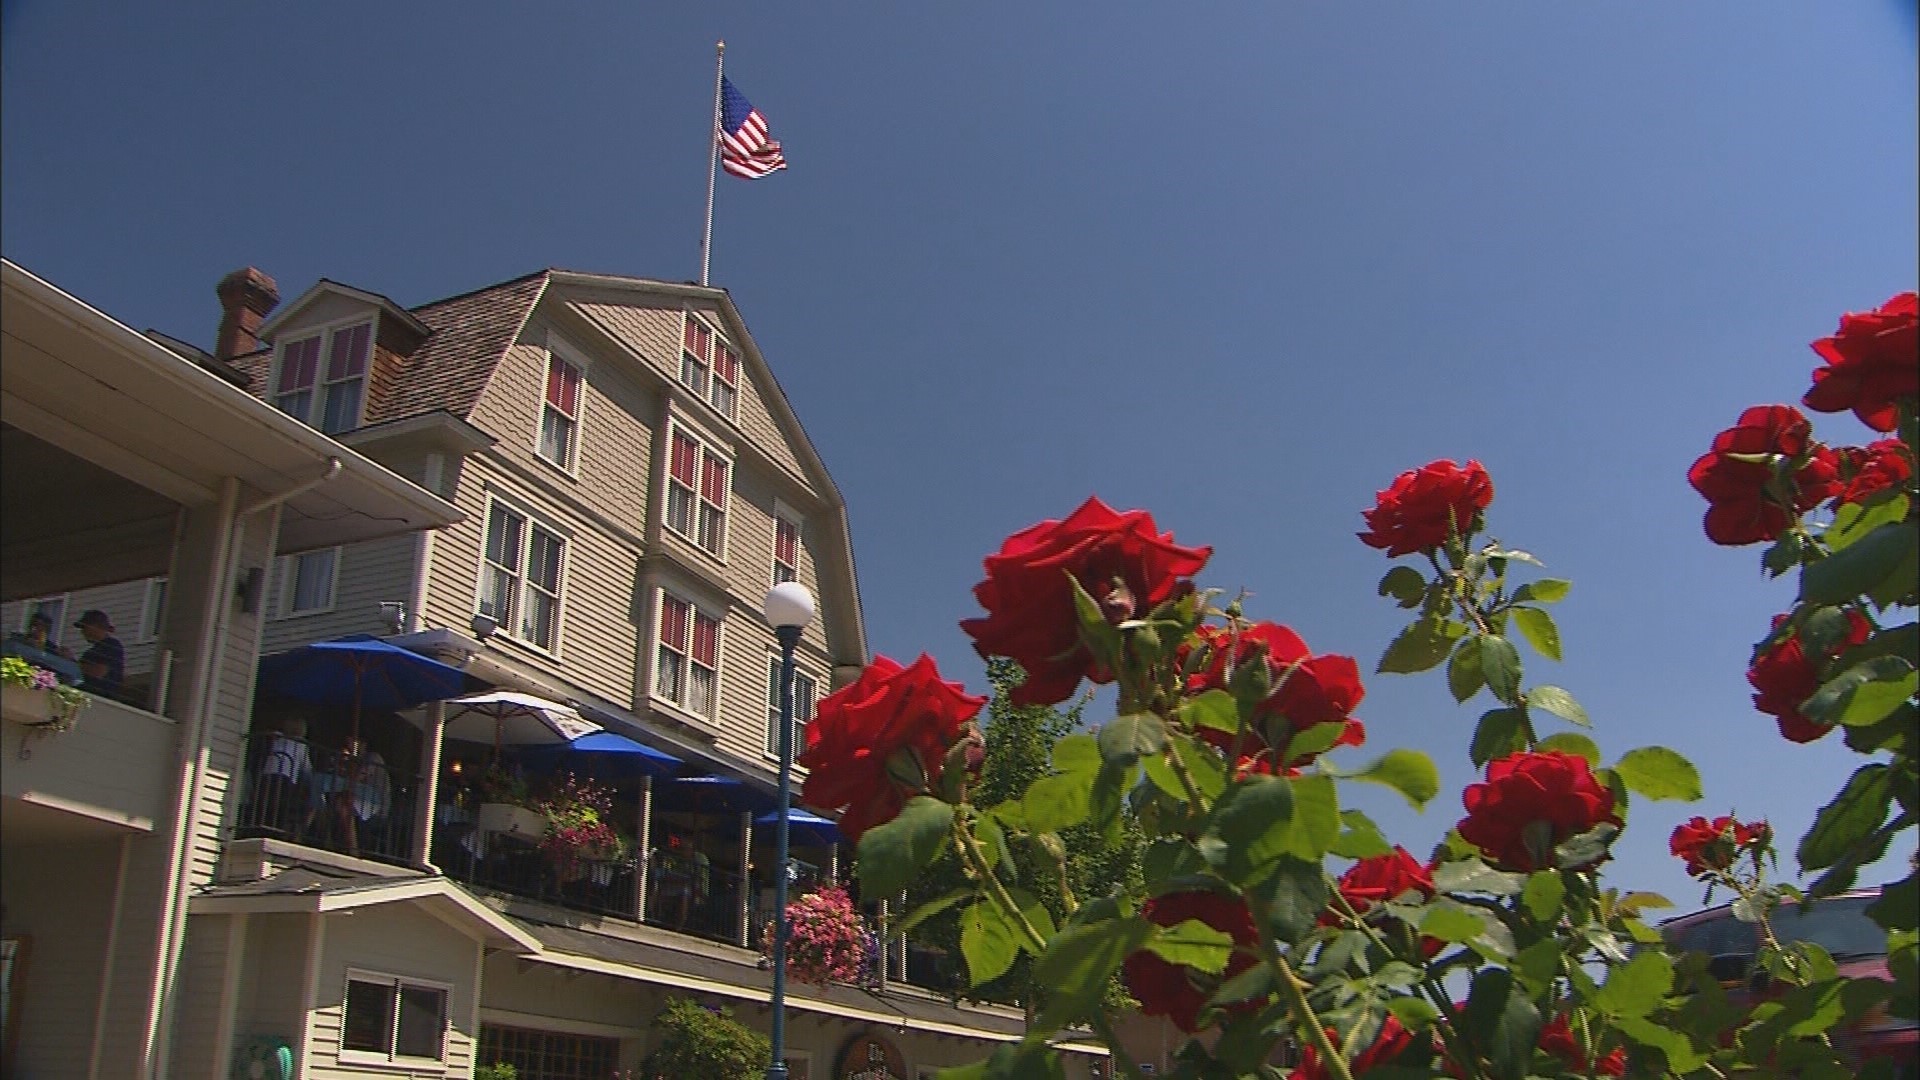 Campbell's Resort on Lake Chelan has been run by the same family since it opened in 1901.